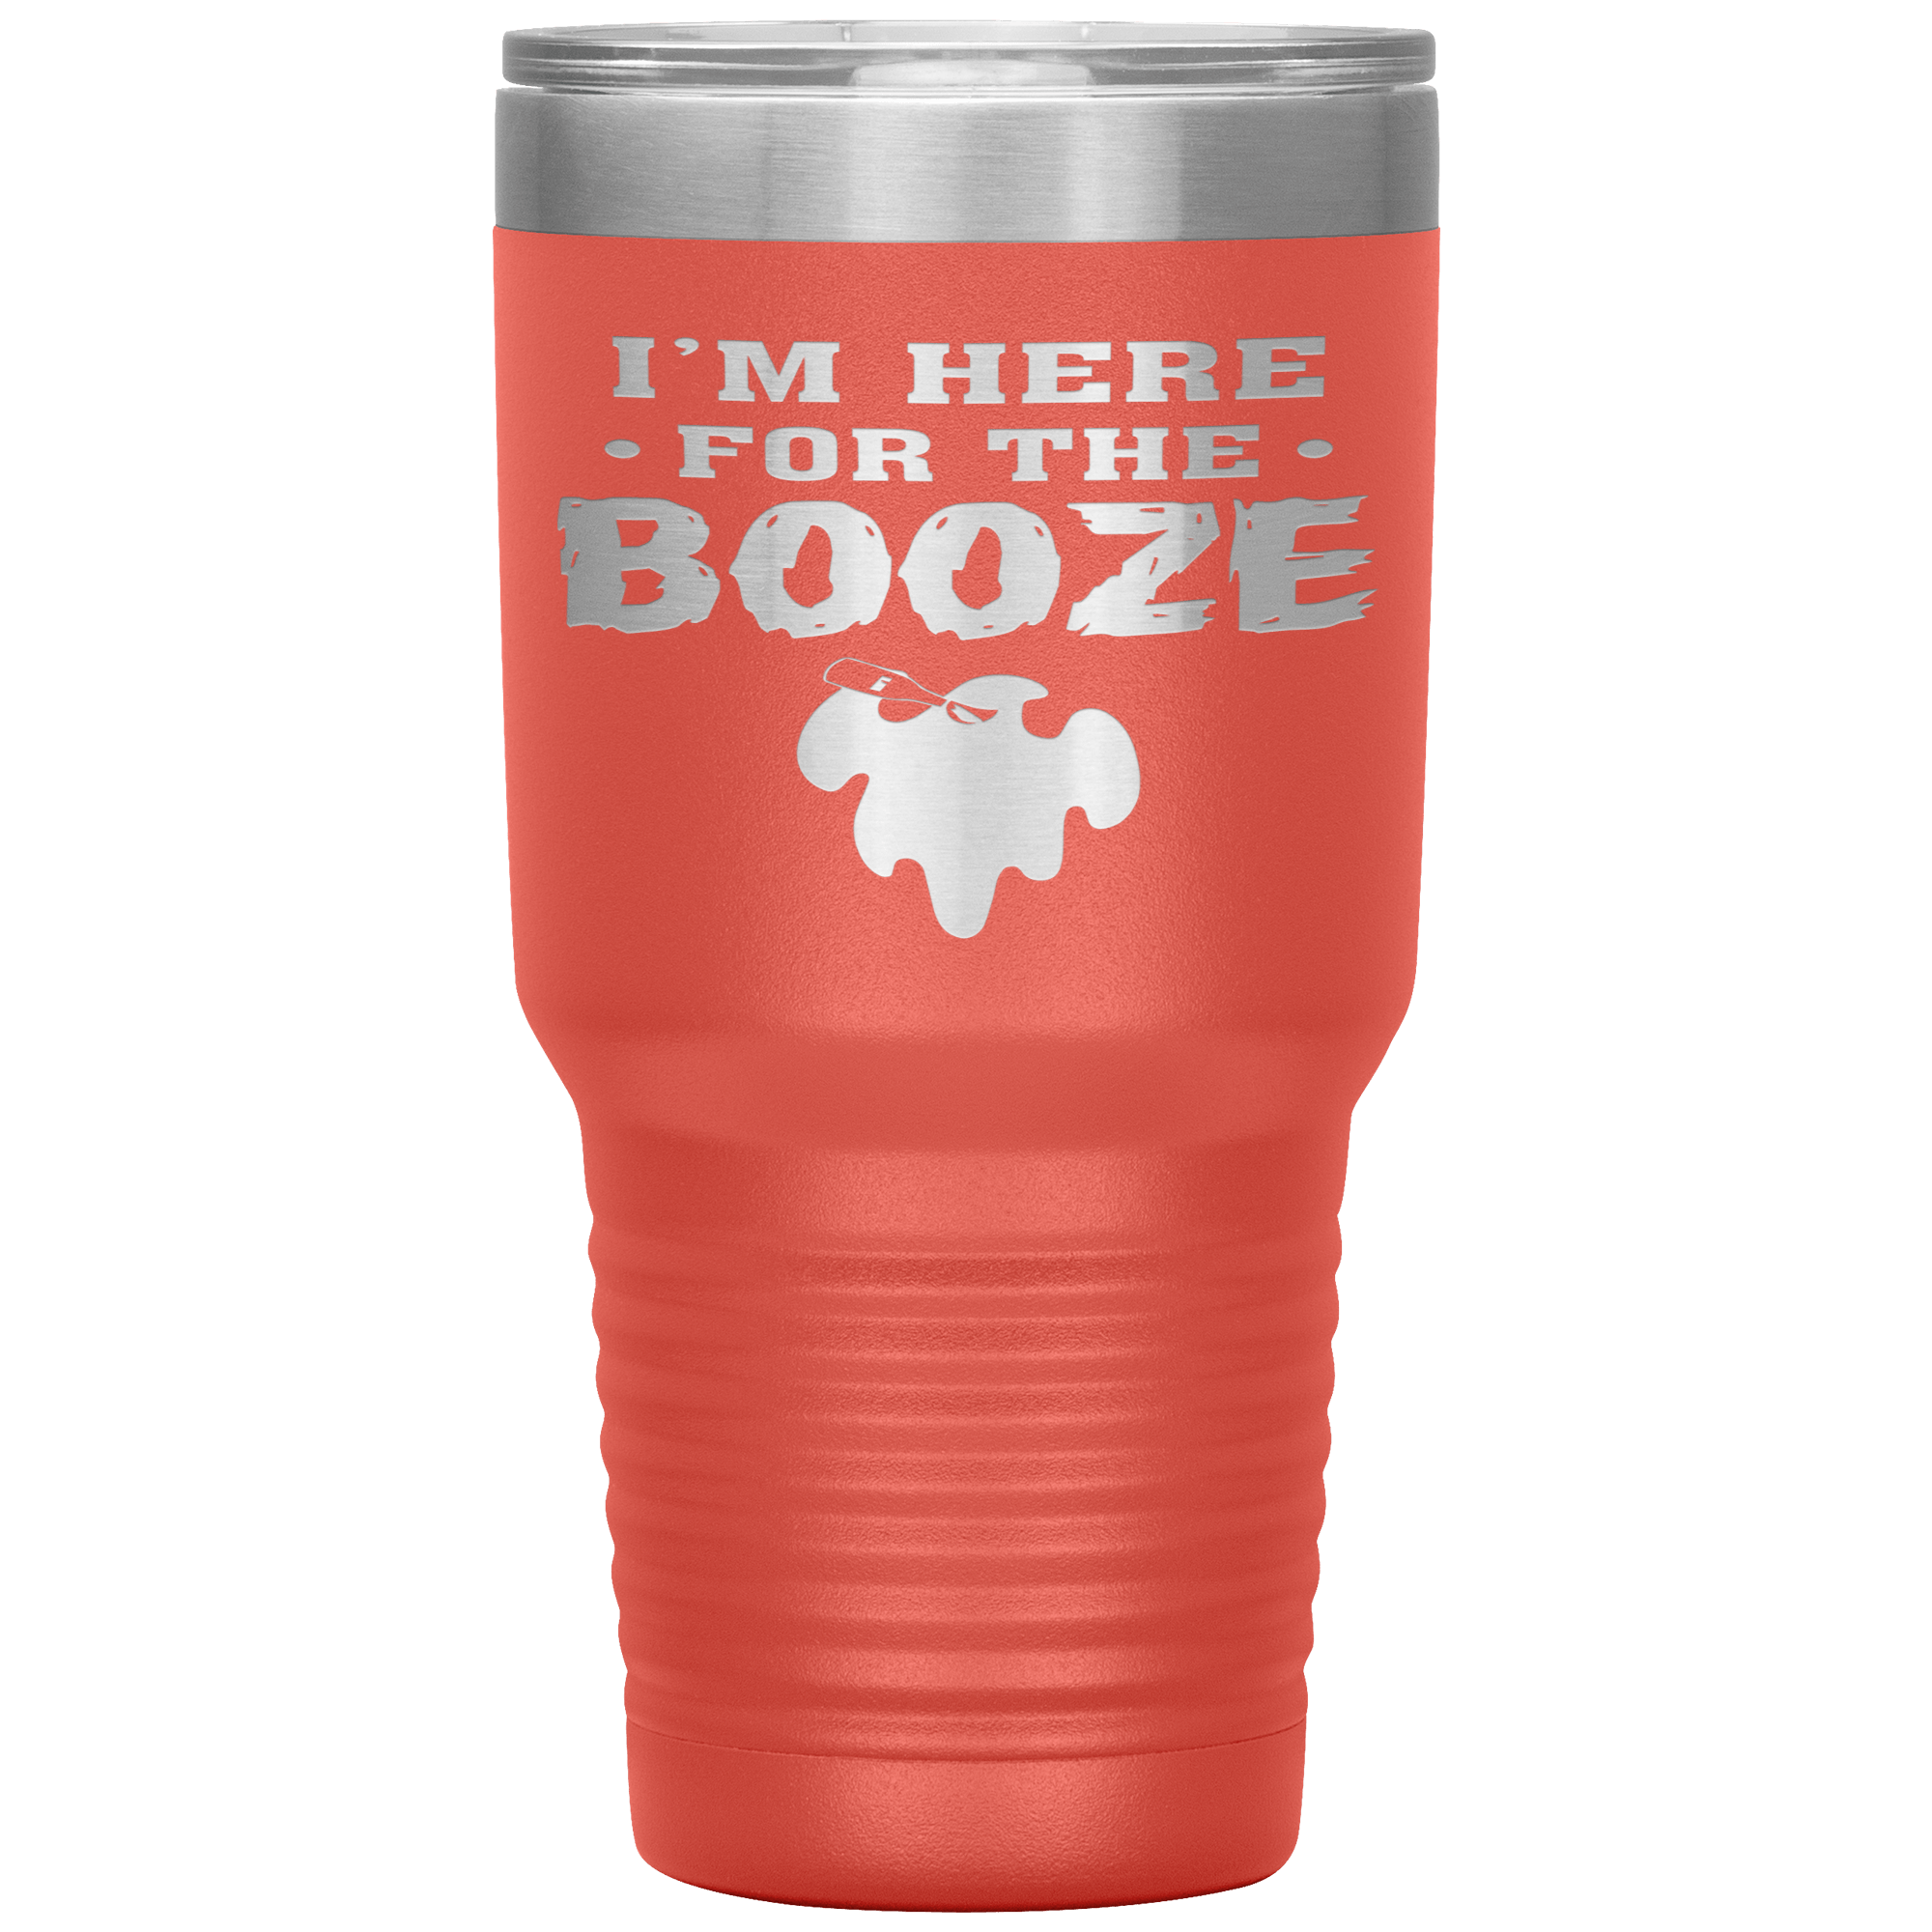 I'M HERE FOR THE BOOZE - TUMBLER